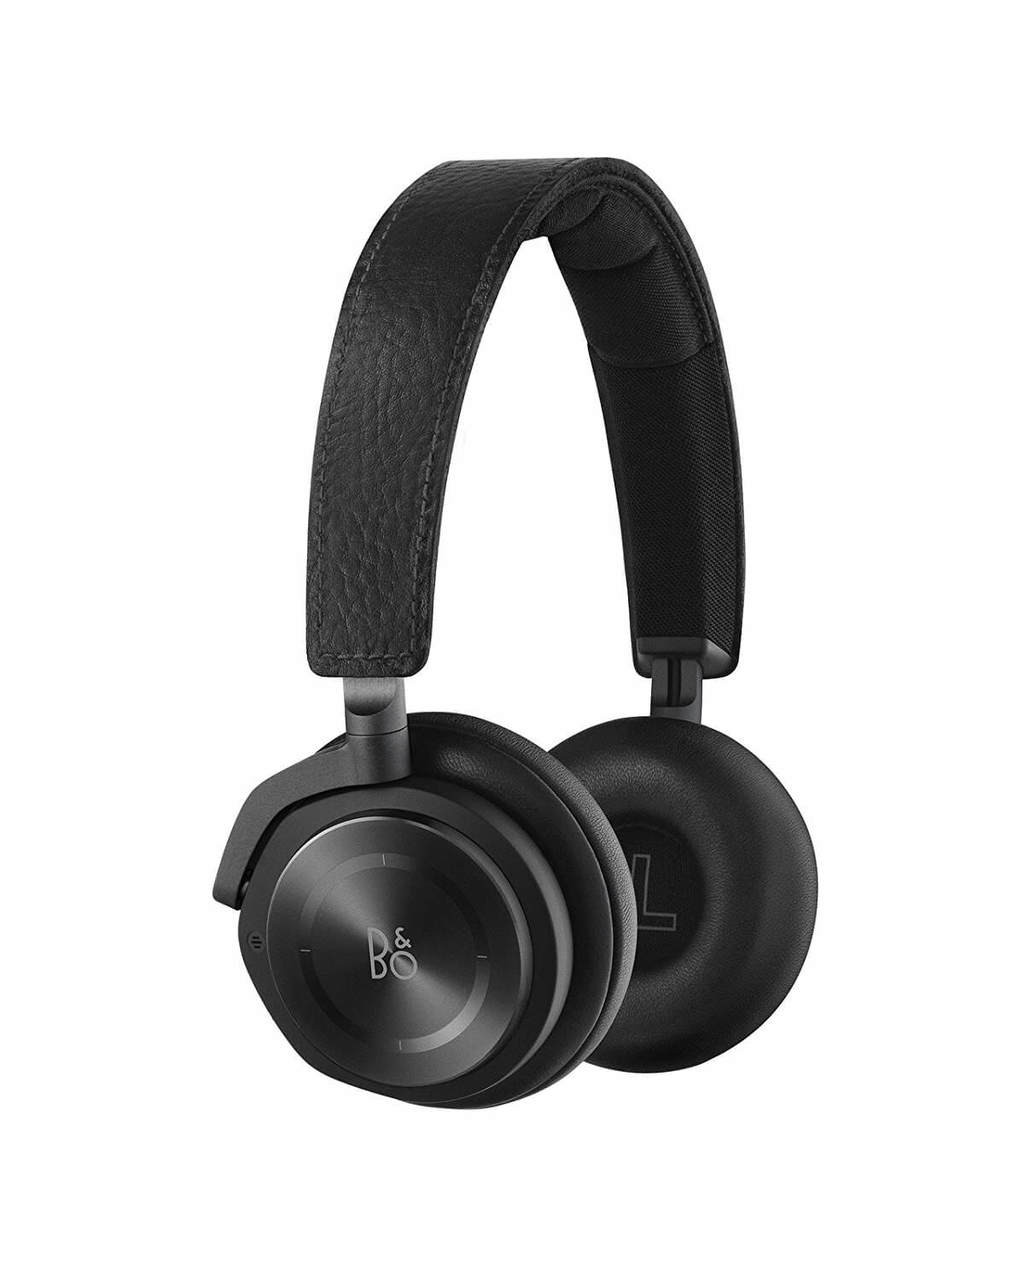 B&O PLAY by Bang & Olufsen Beoplay H8 ANC On-Ear Headphones